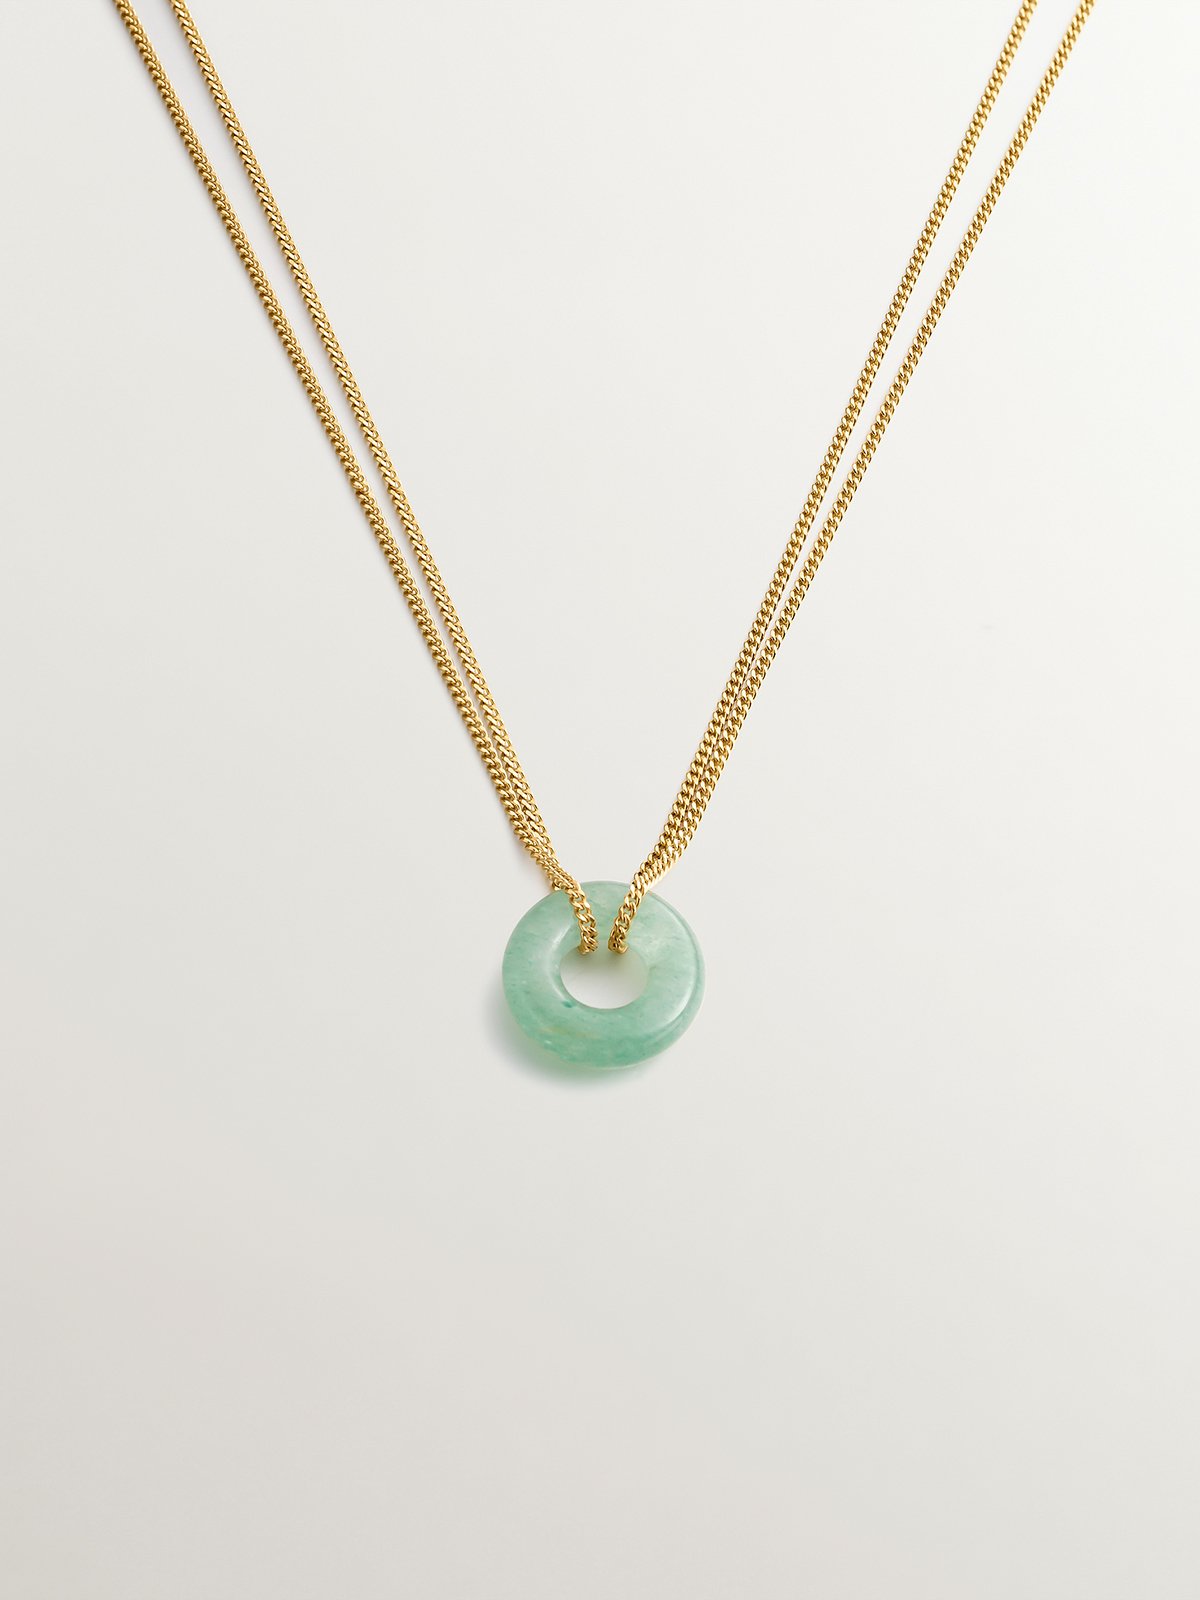 Yellow 18K gold-plated 925 silver pendant with green aventurine